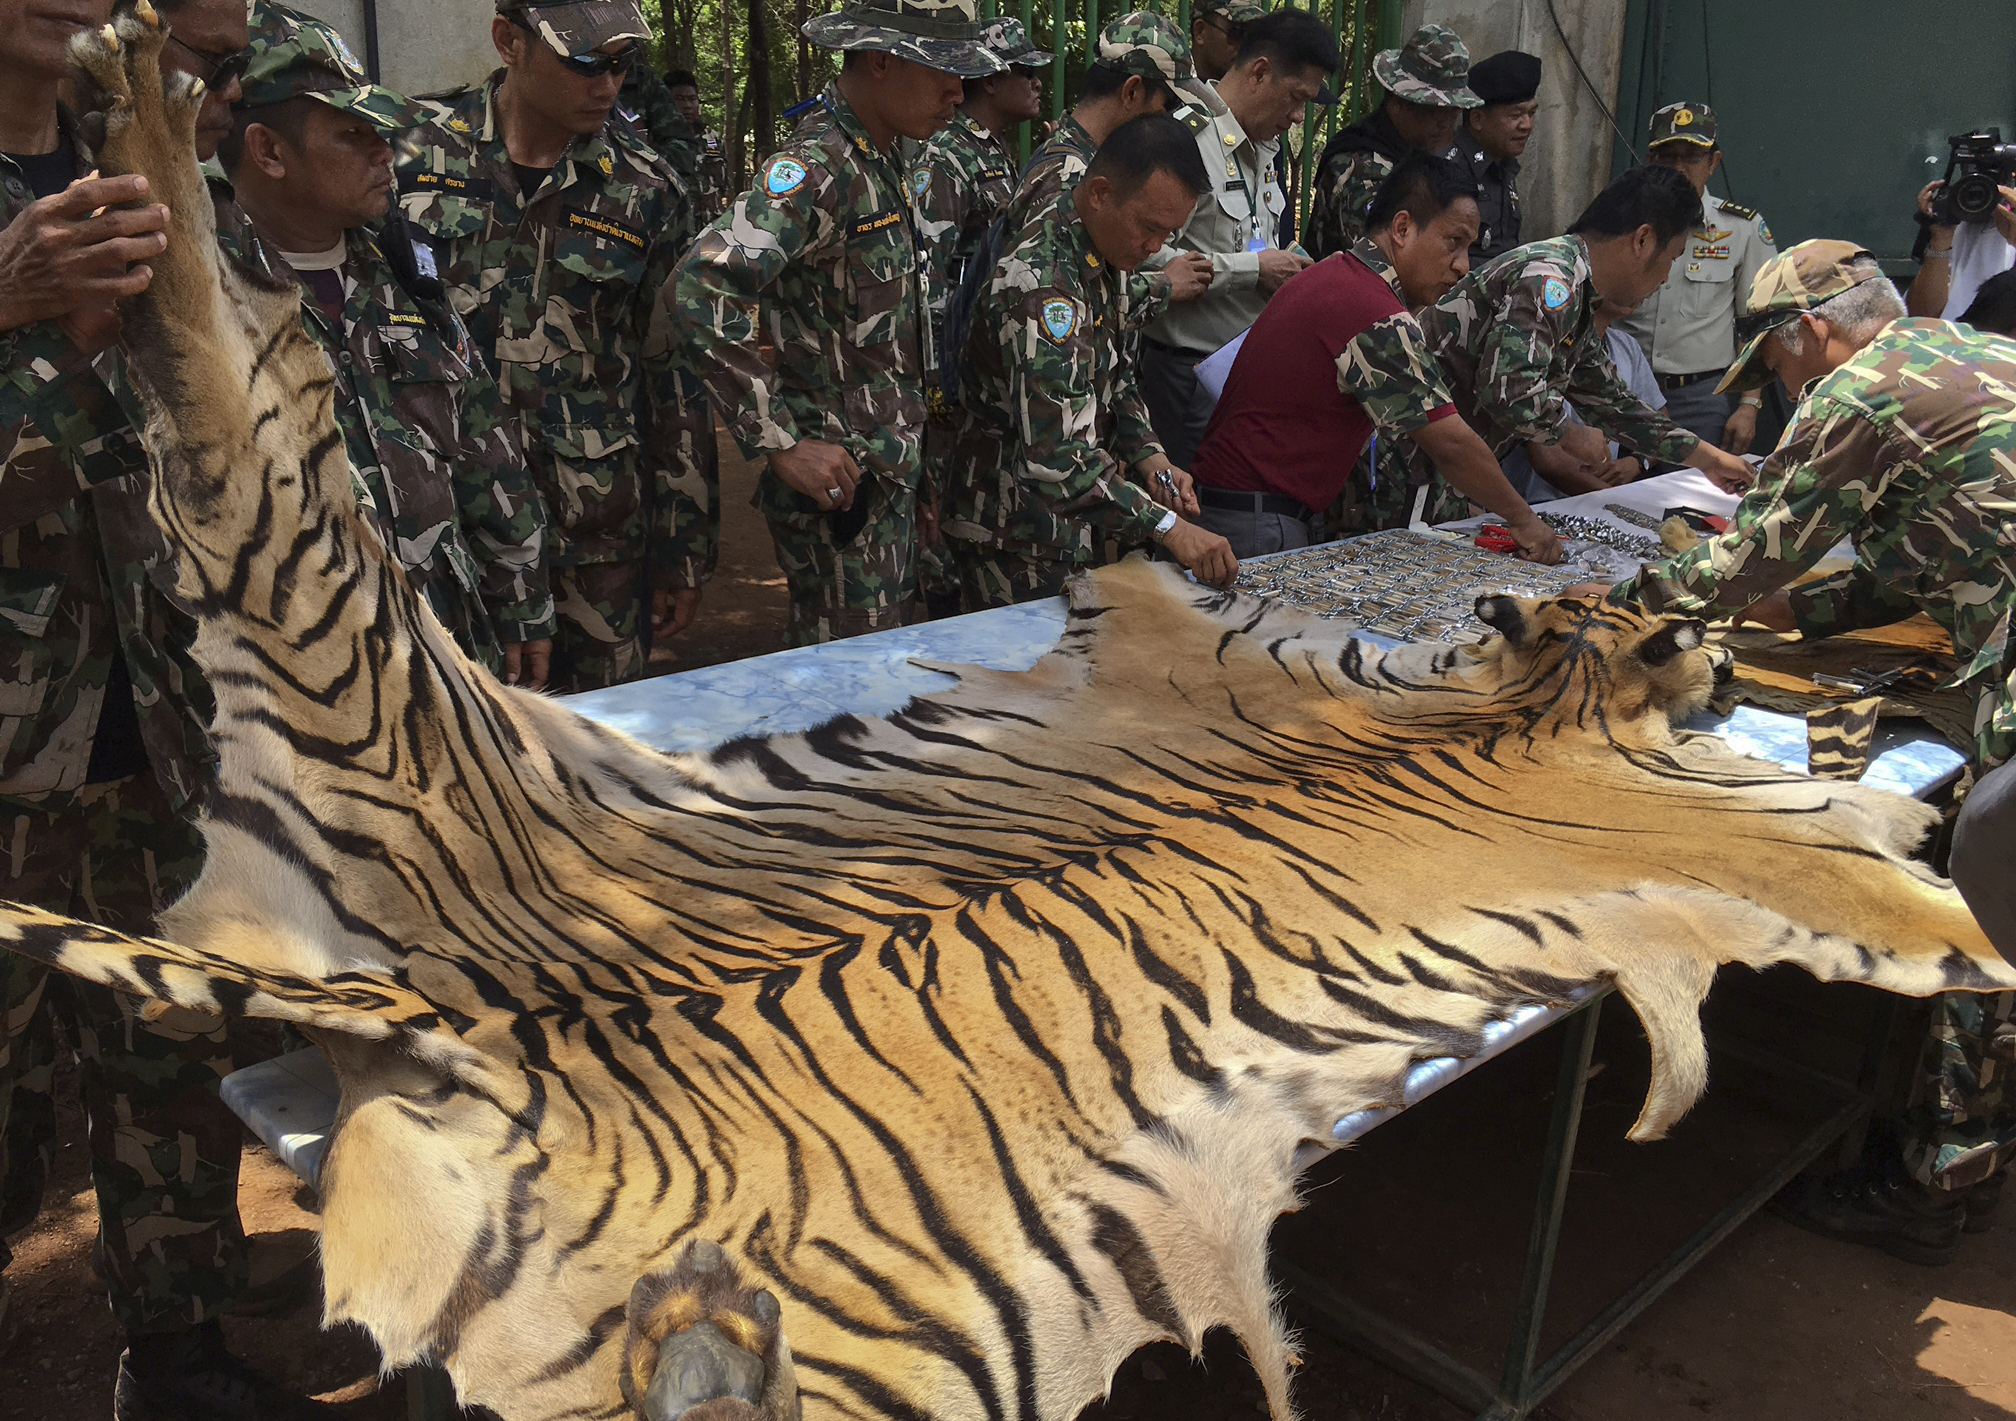 National Parks and Wildlife officers examine the skin of a tiger at the "Tiger Temple," in Saiyok district in Kanchanaburi province, west of Bangkok, Thailand, June 2, 2016.